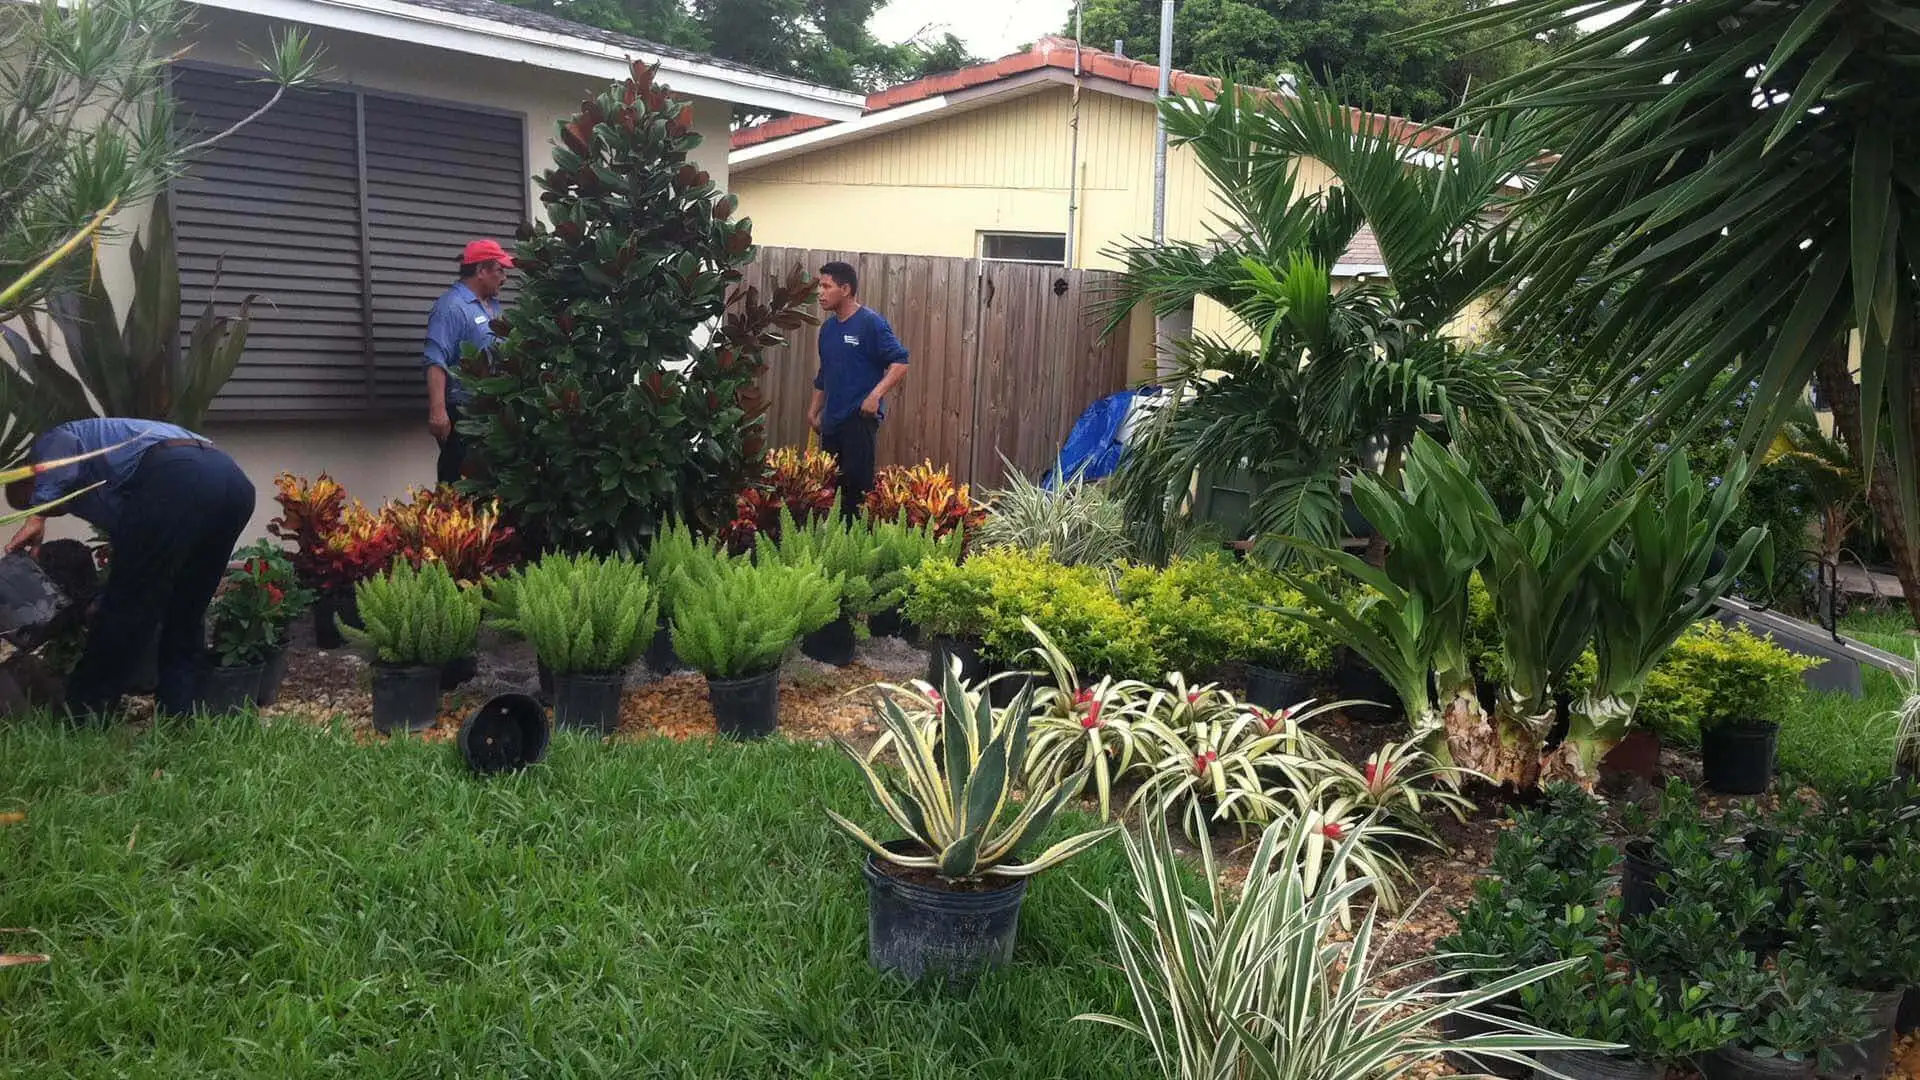 Go2Scape.Inc employees working on a residential home in Parkland, FL